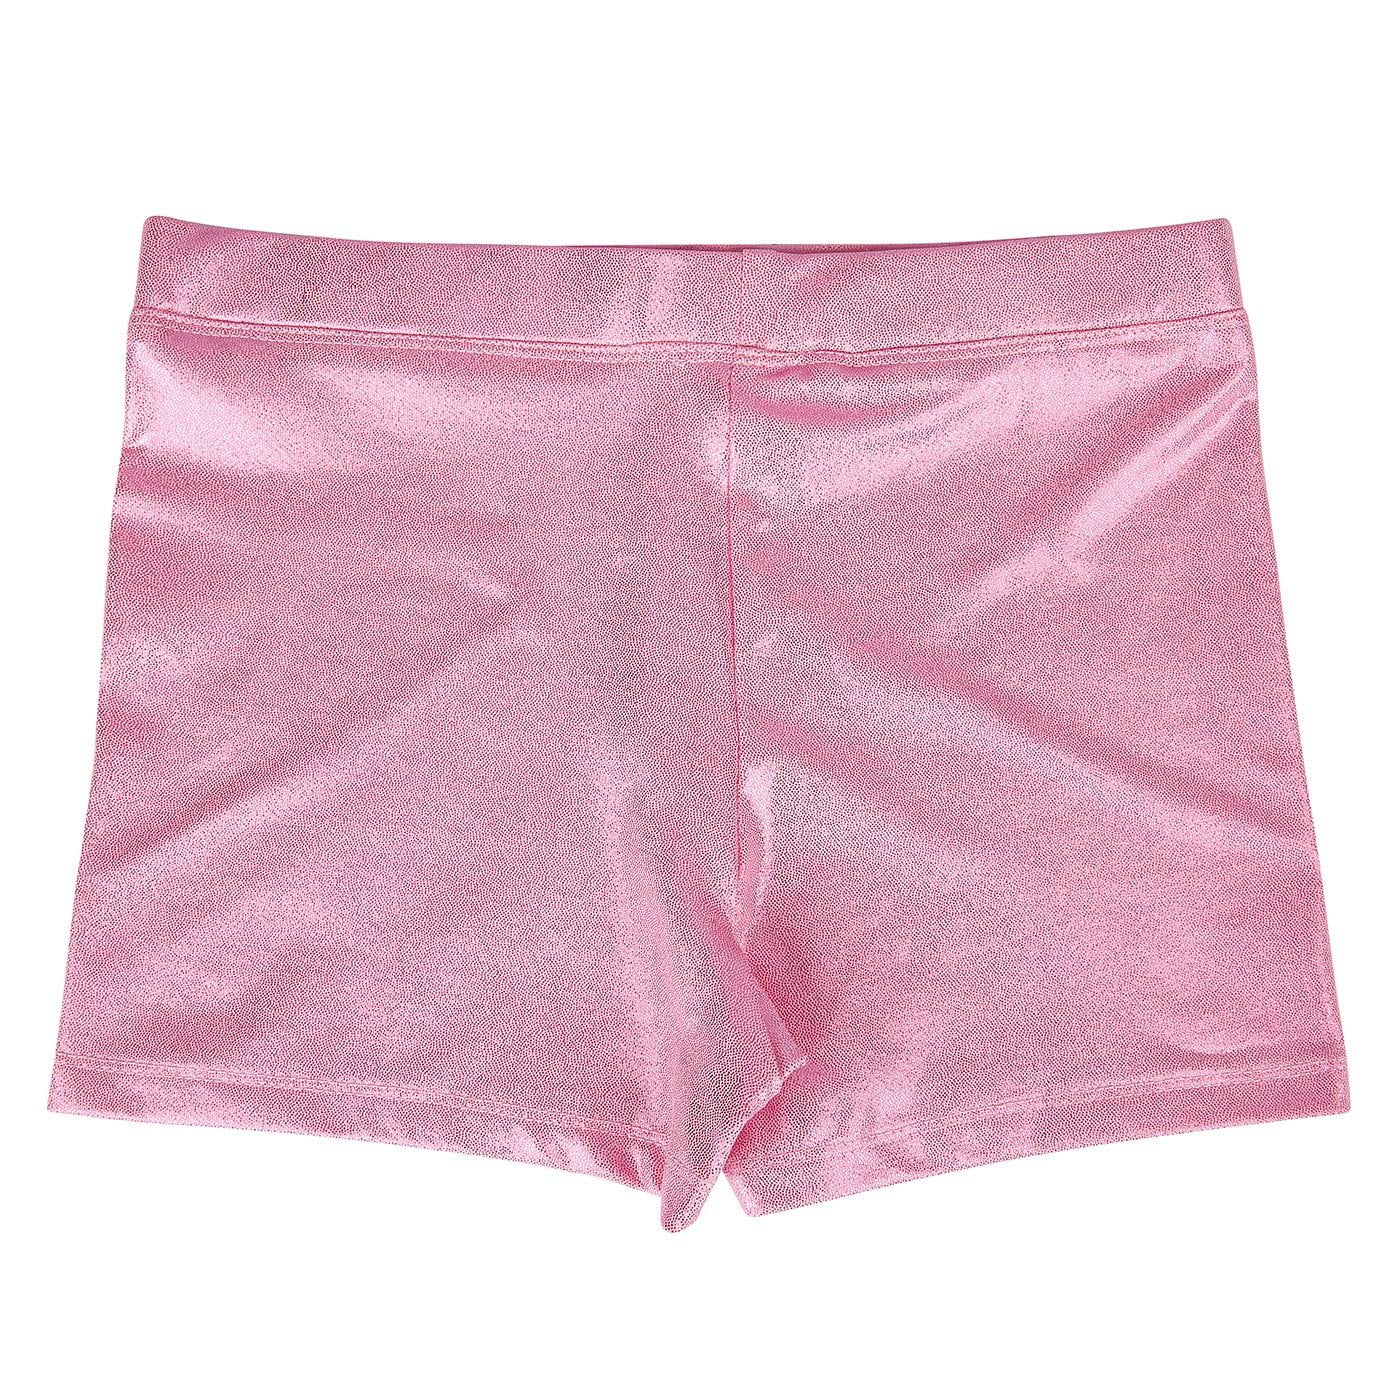 works well with size 4-5 Xsmall Gymnastic or cheer shorts in black mystique fabric